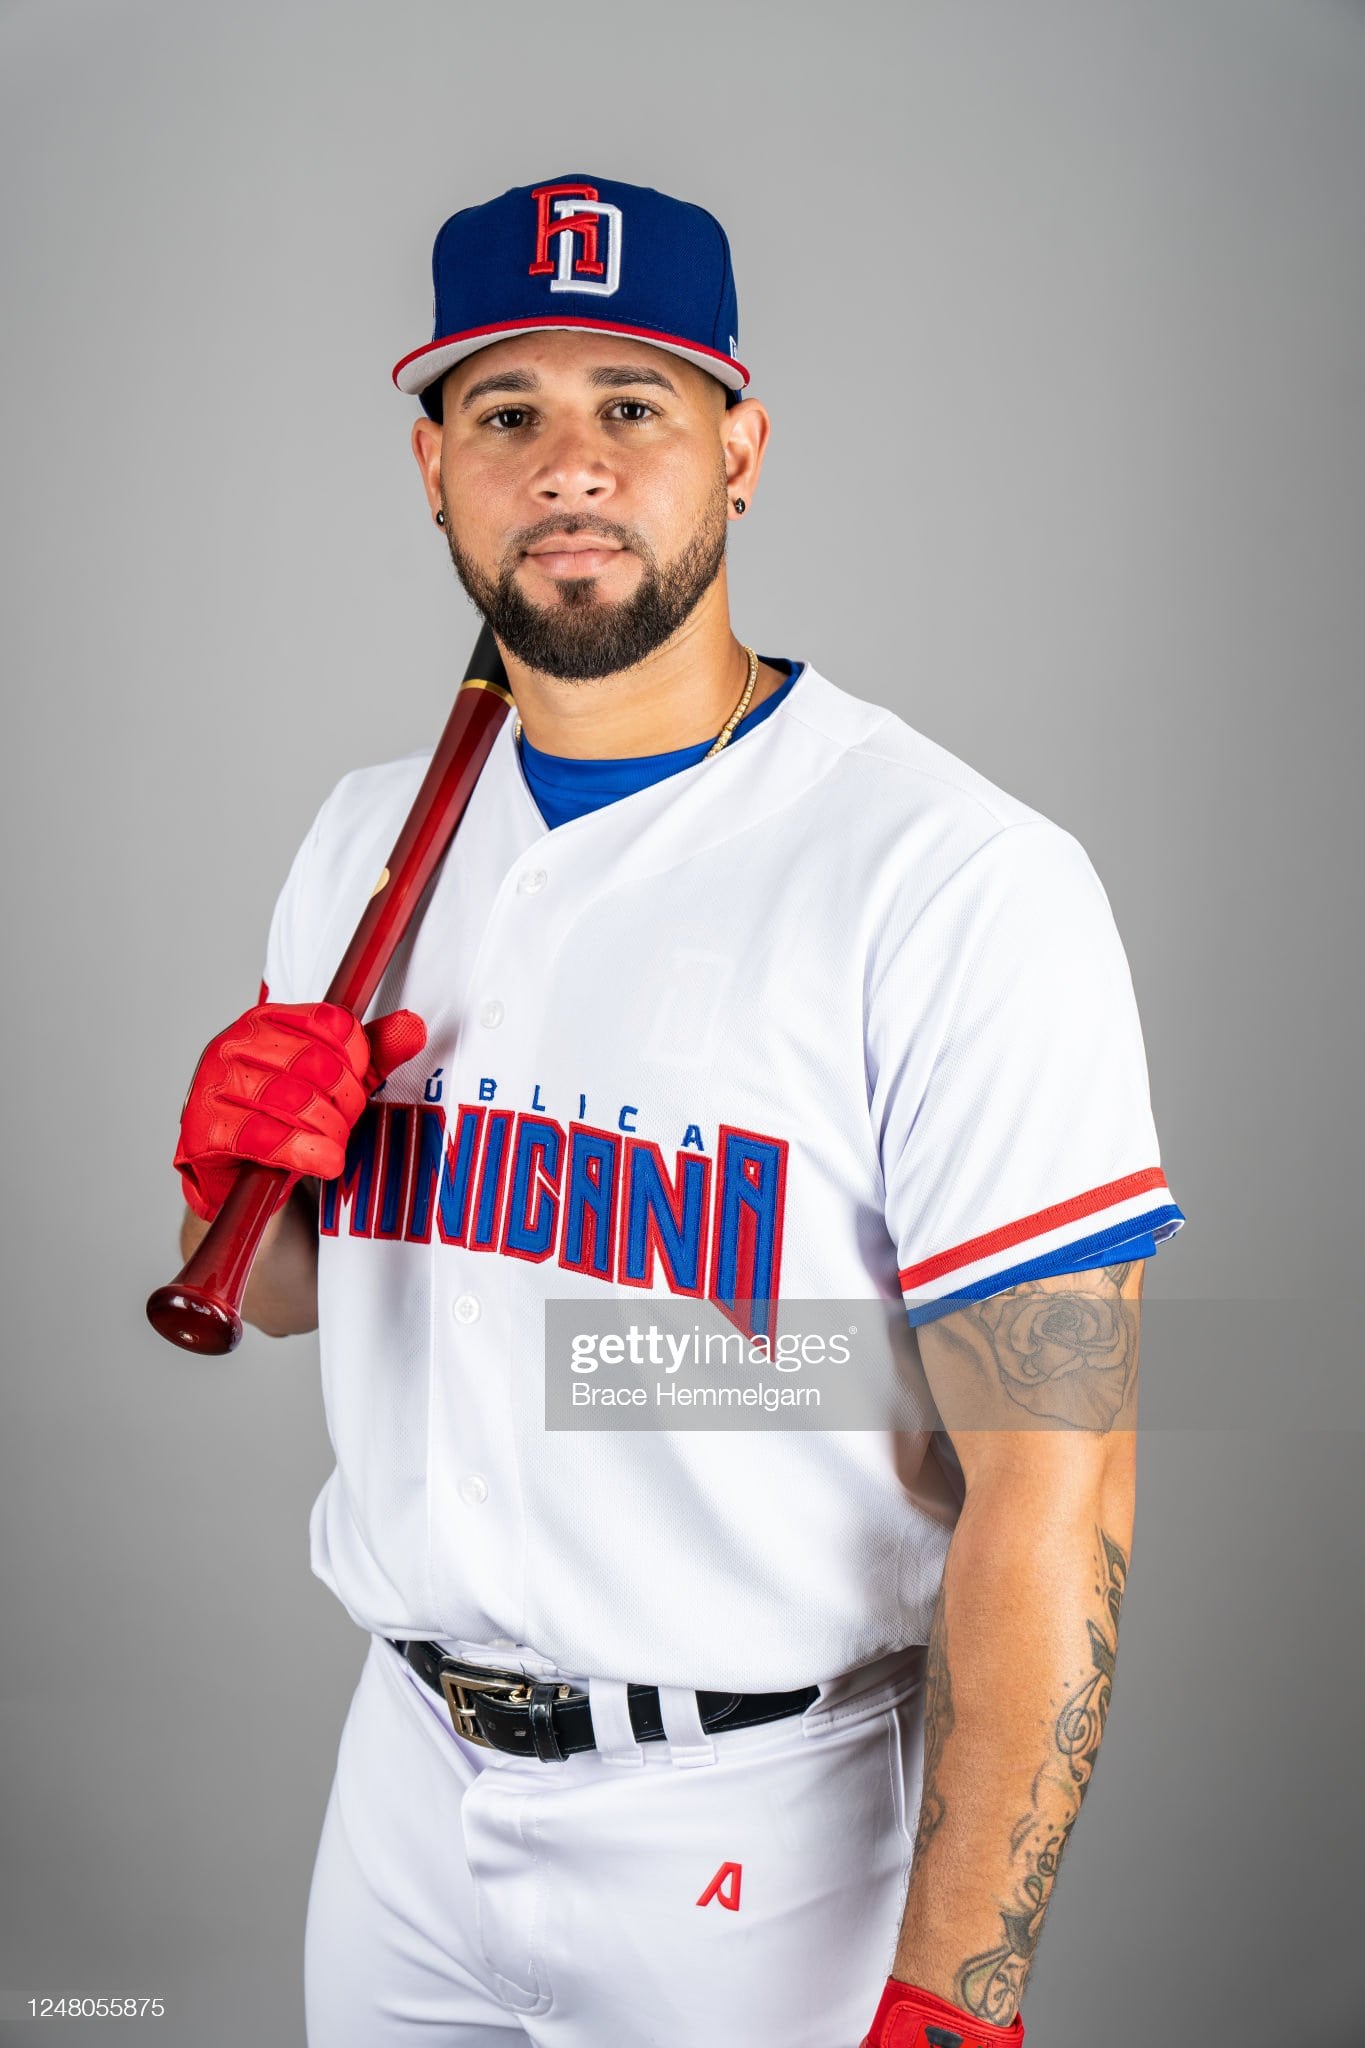 Gary Sanchez, who represented the DR at the World Baseball Classic